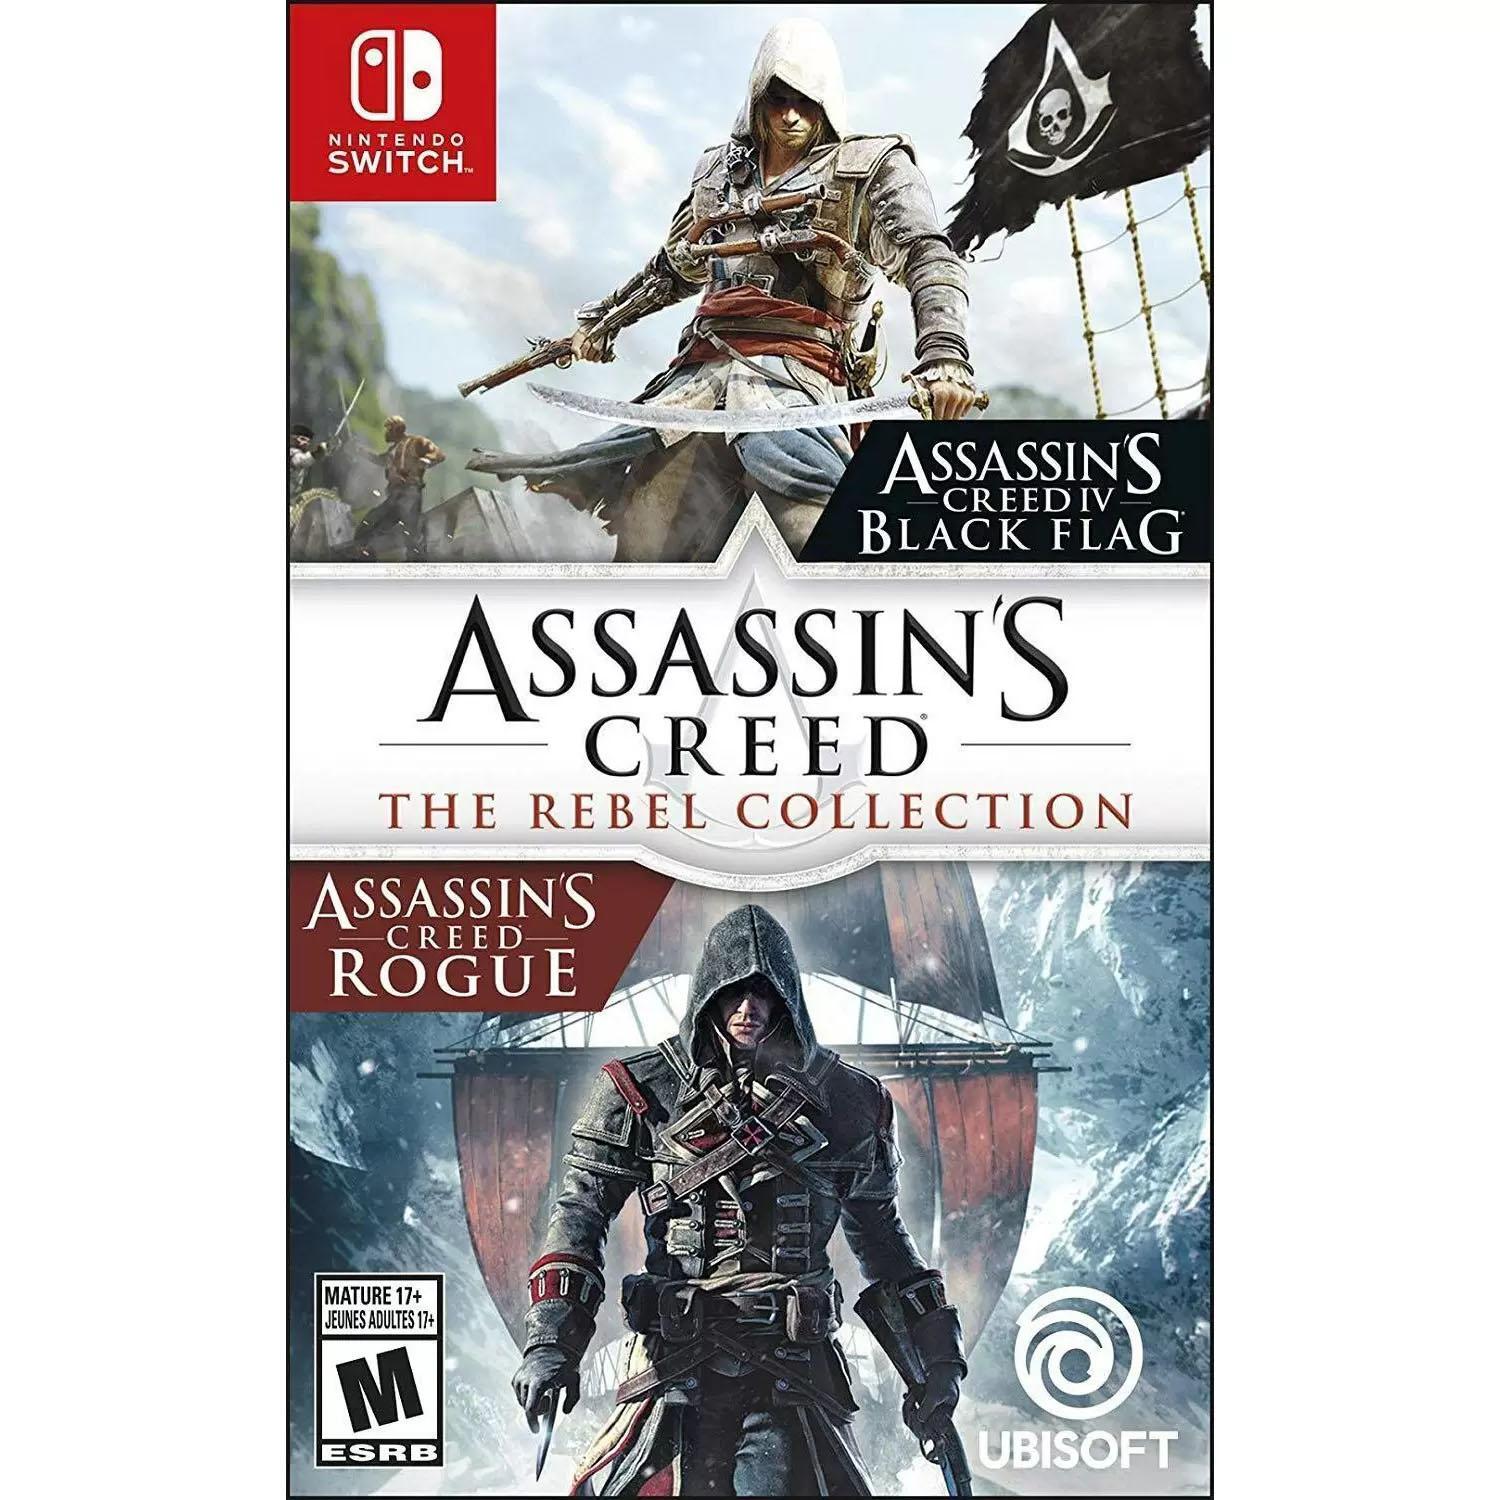 Assassins Creed The Rebel Collection Nintendo Switch for $14.99